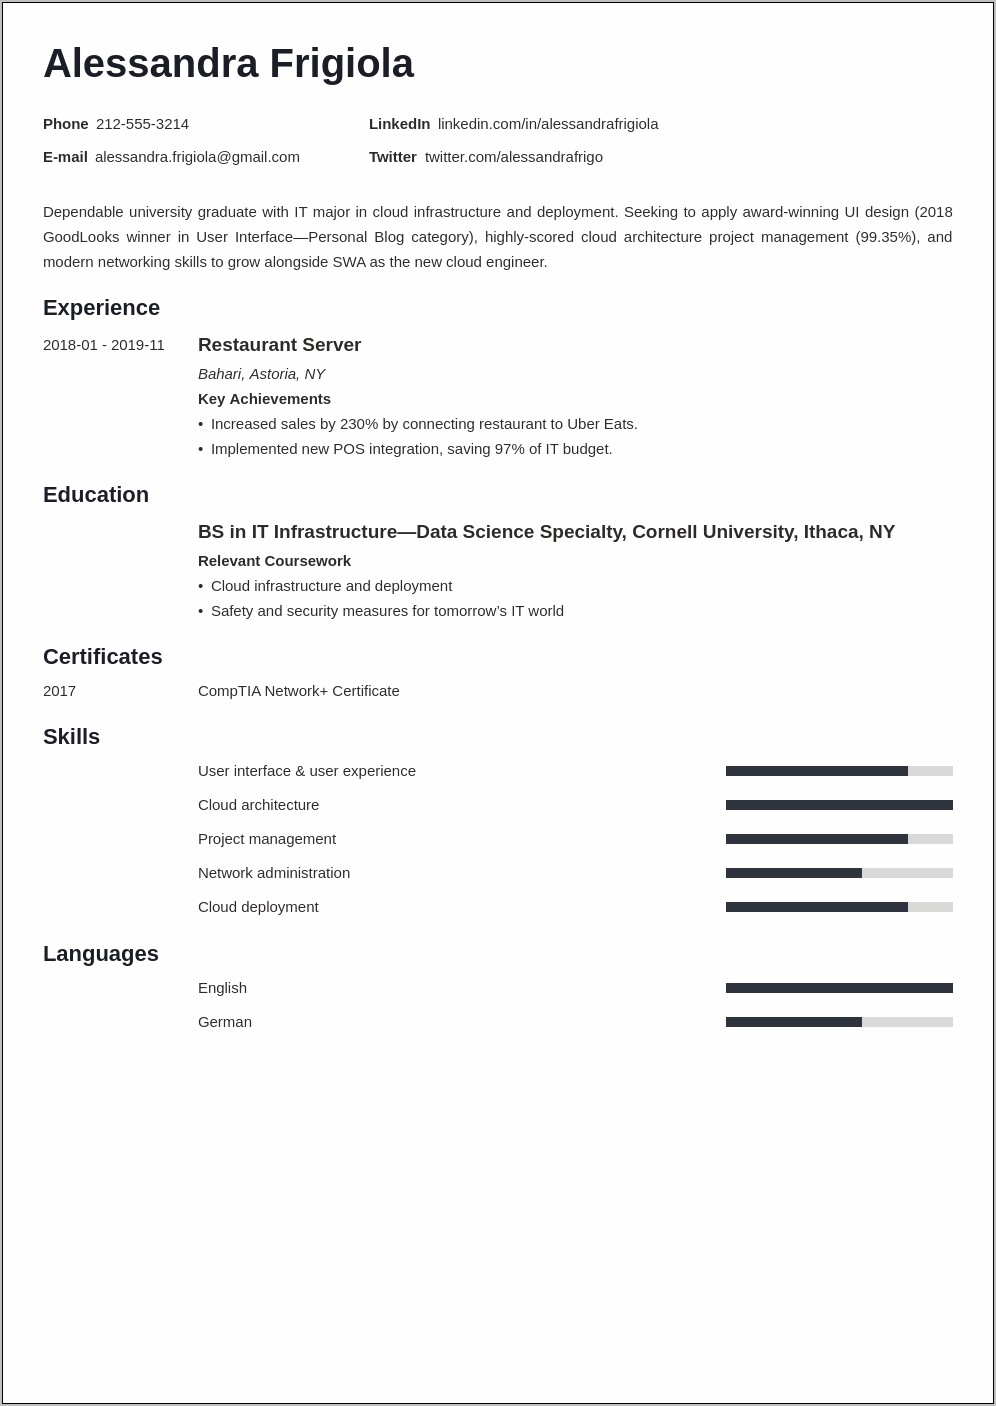 Computer Science Resume Objective Examples